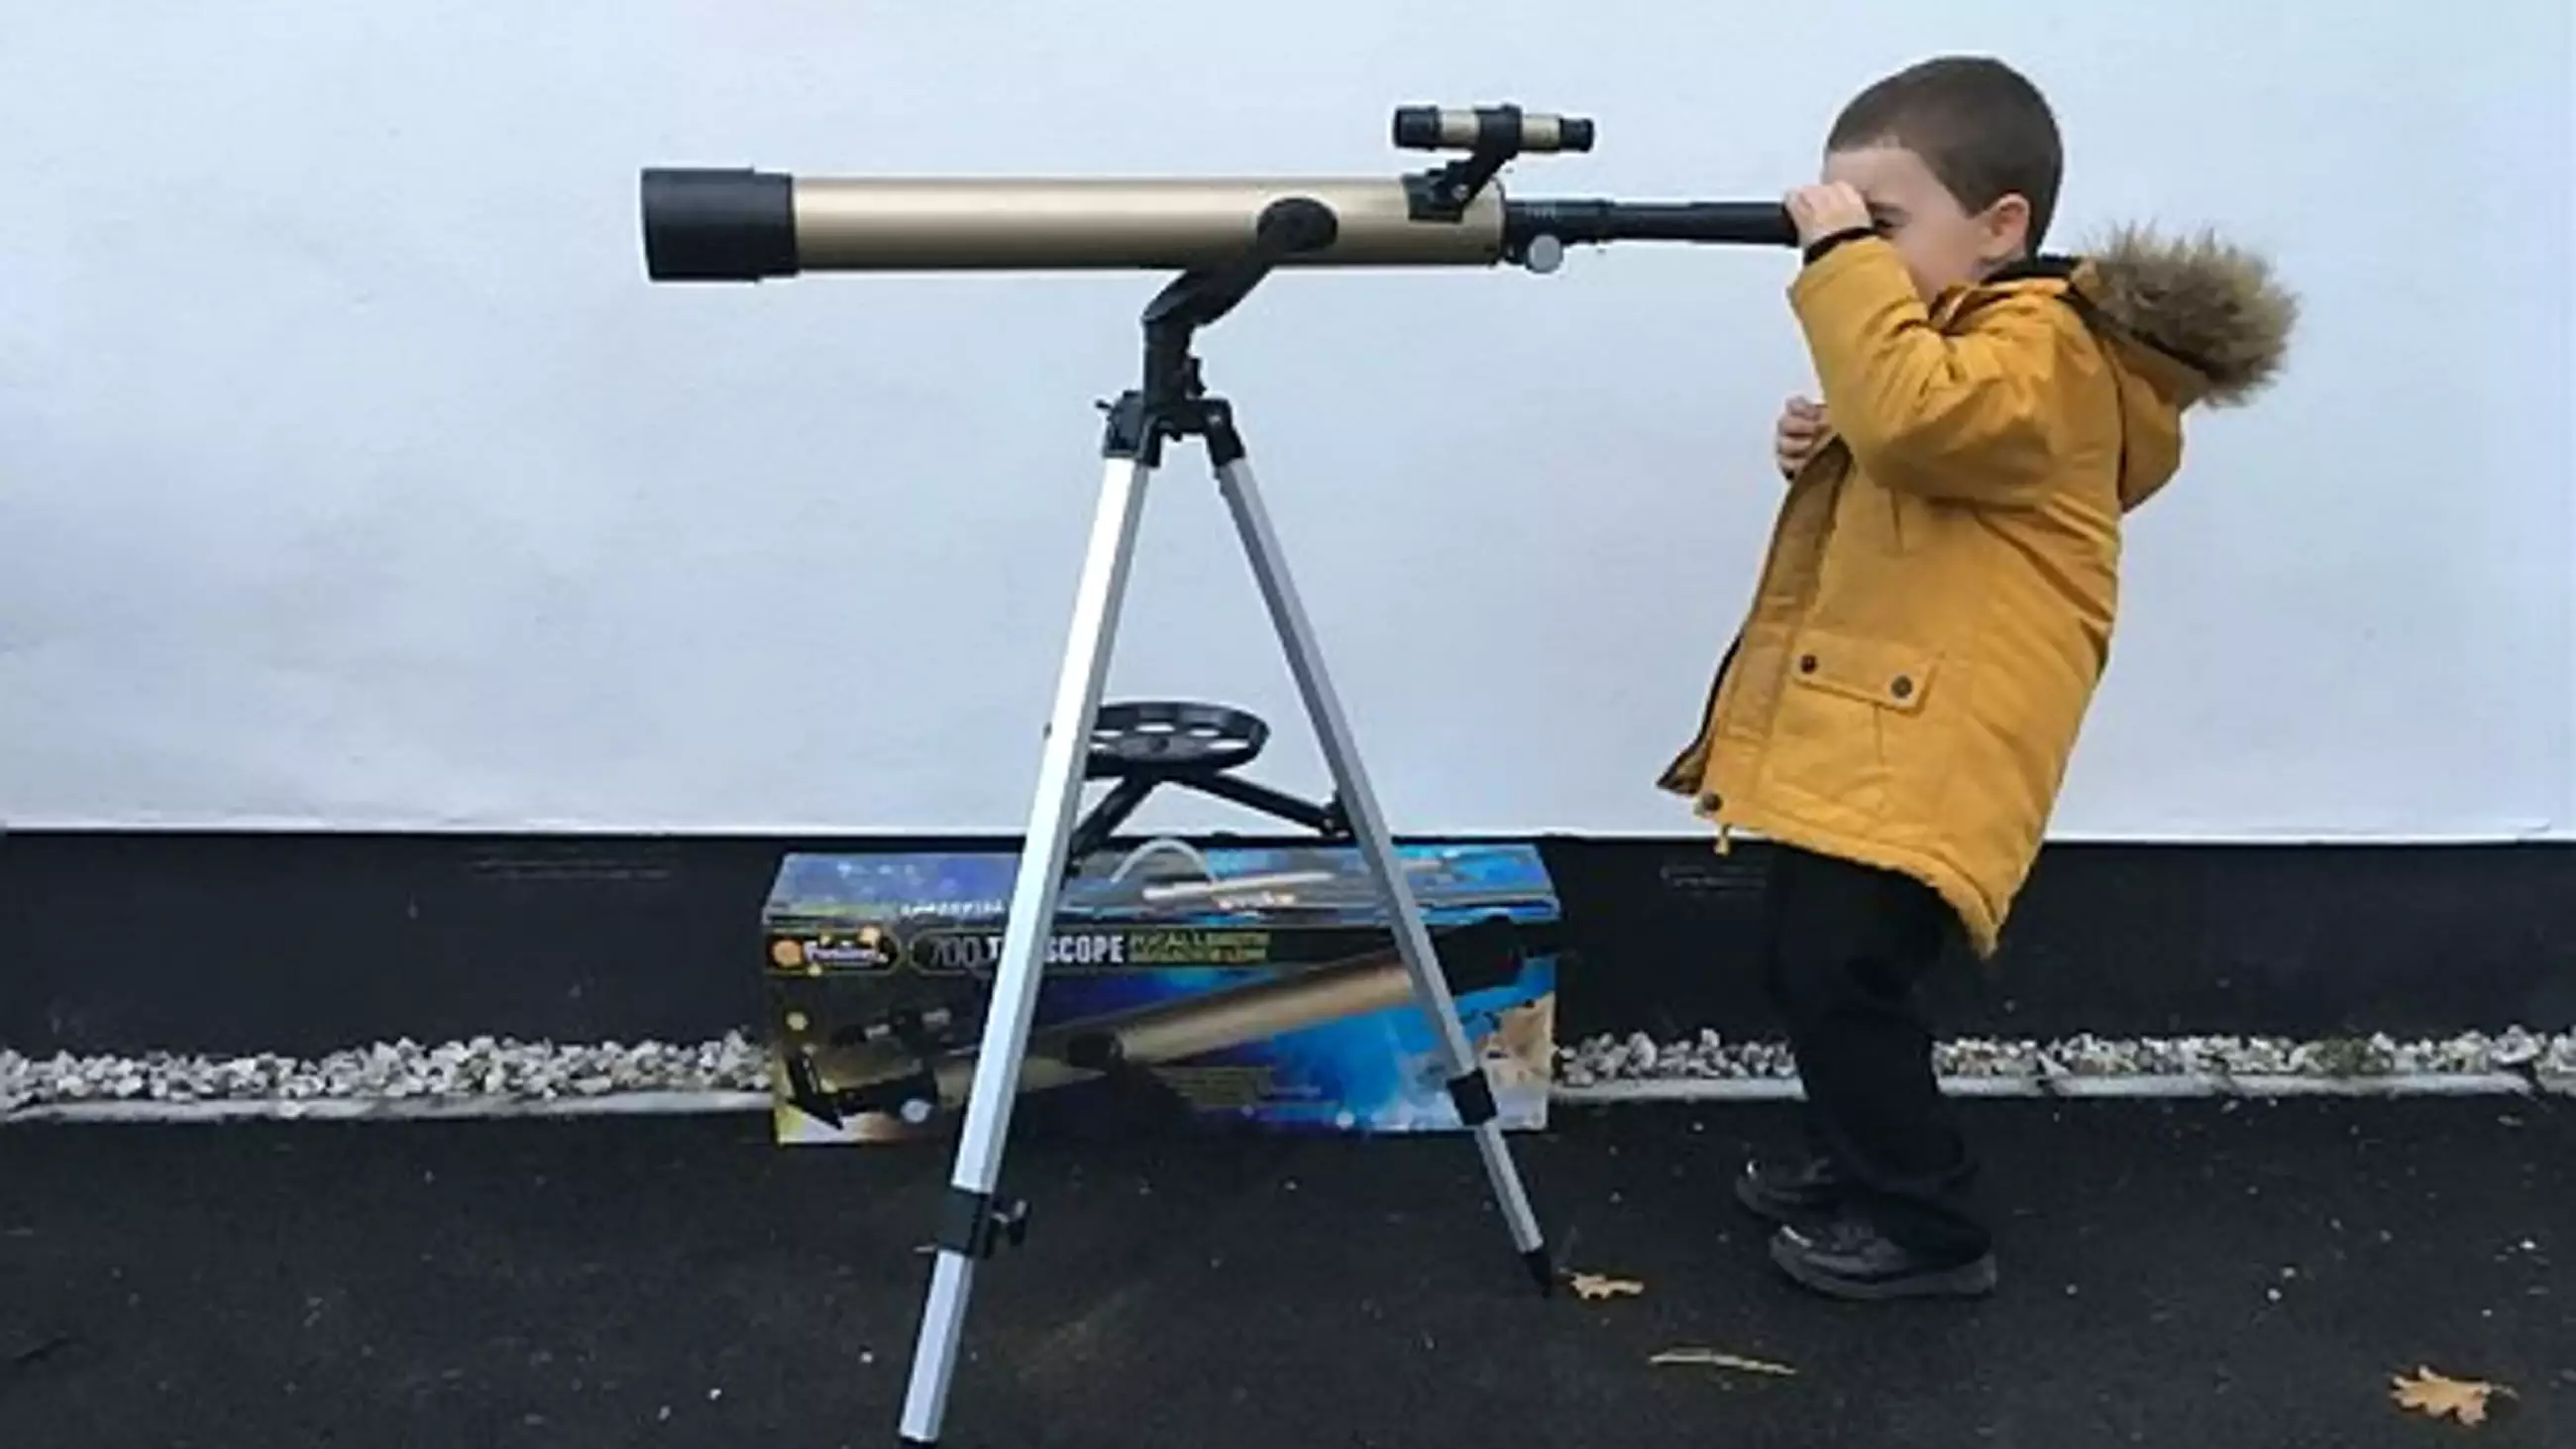 Mum 'Devastated' After Buying £50 Telescope That Doesn't Clearly Show The Moon 